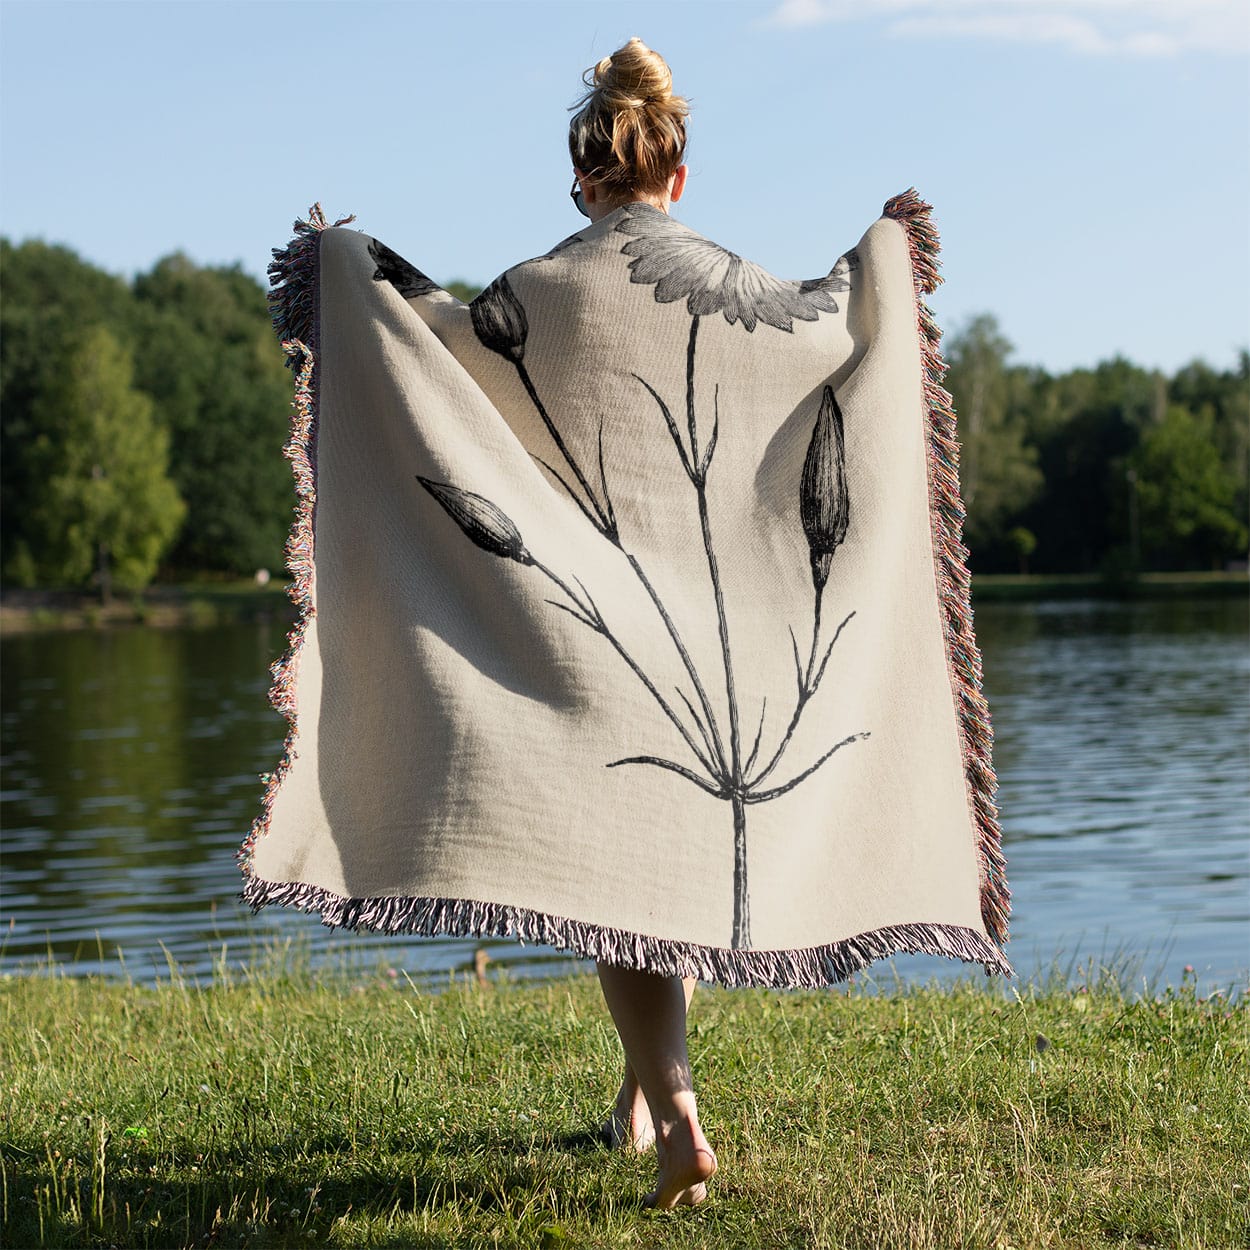 Floral Woven Blanket Held on a Woman's Back Outside